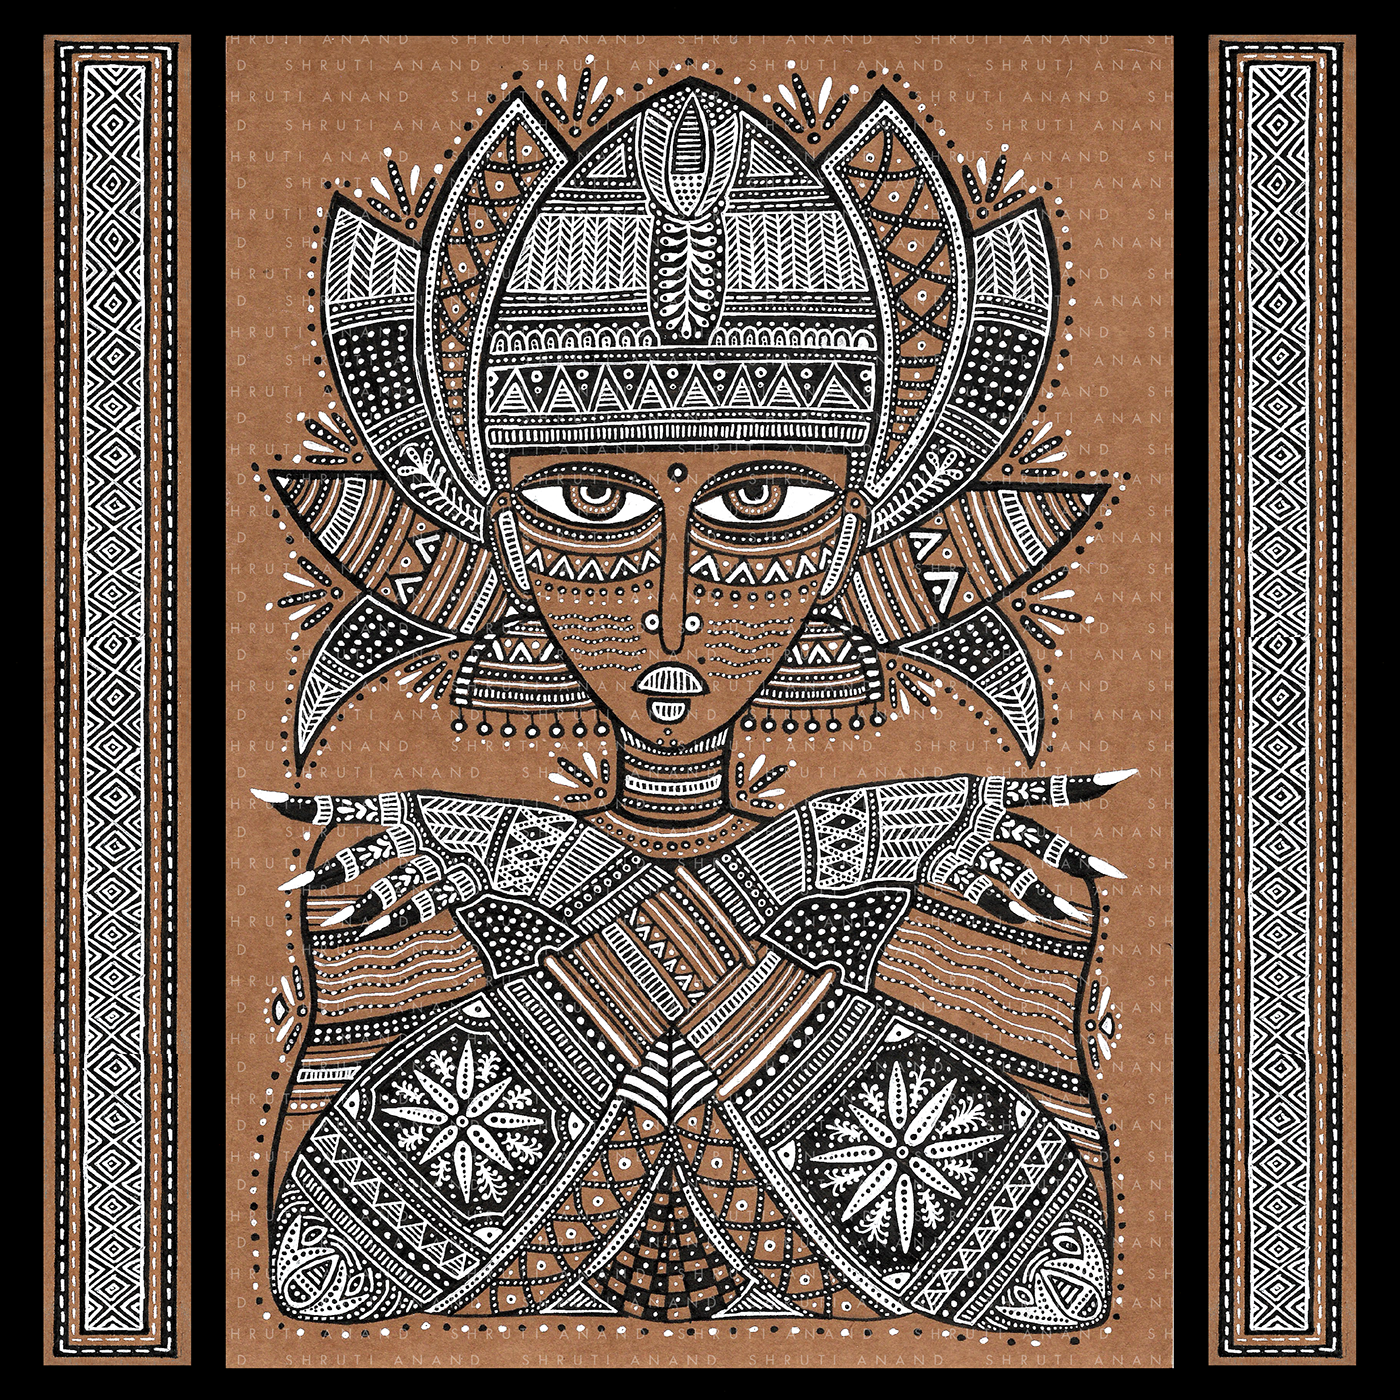 ILLUSTRATION  indian graphic design  details shruti anand tribal hand drawn black and white